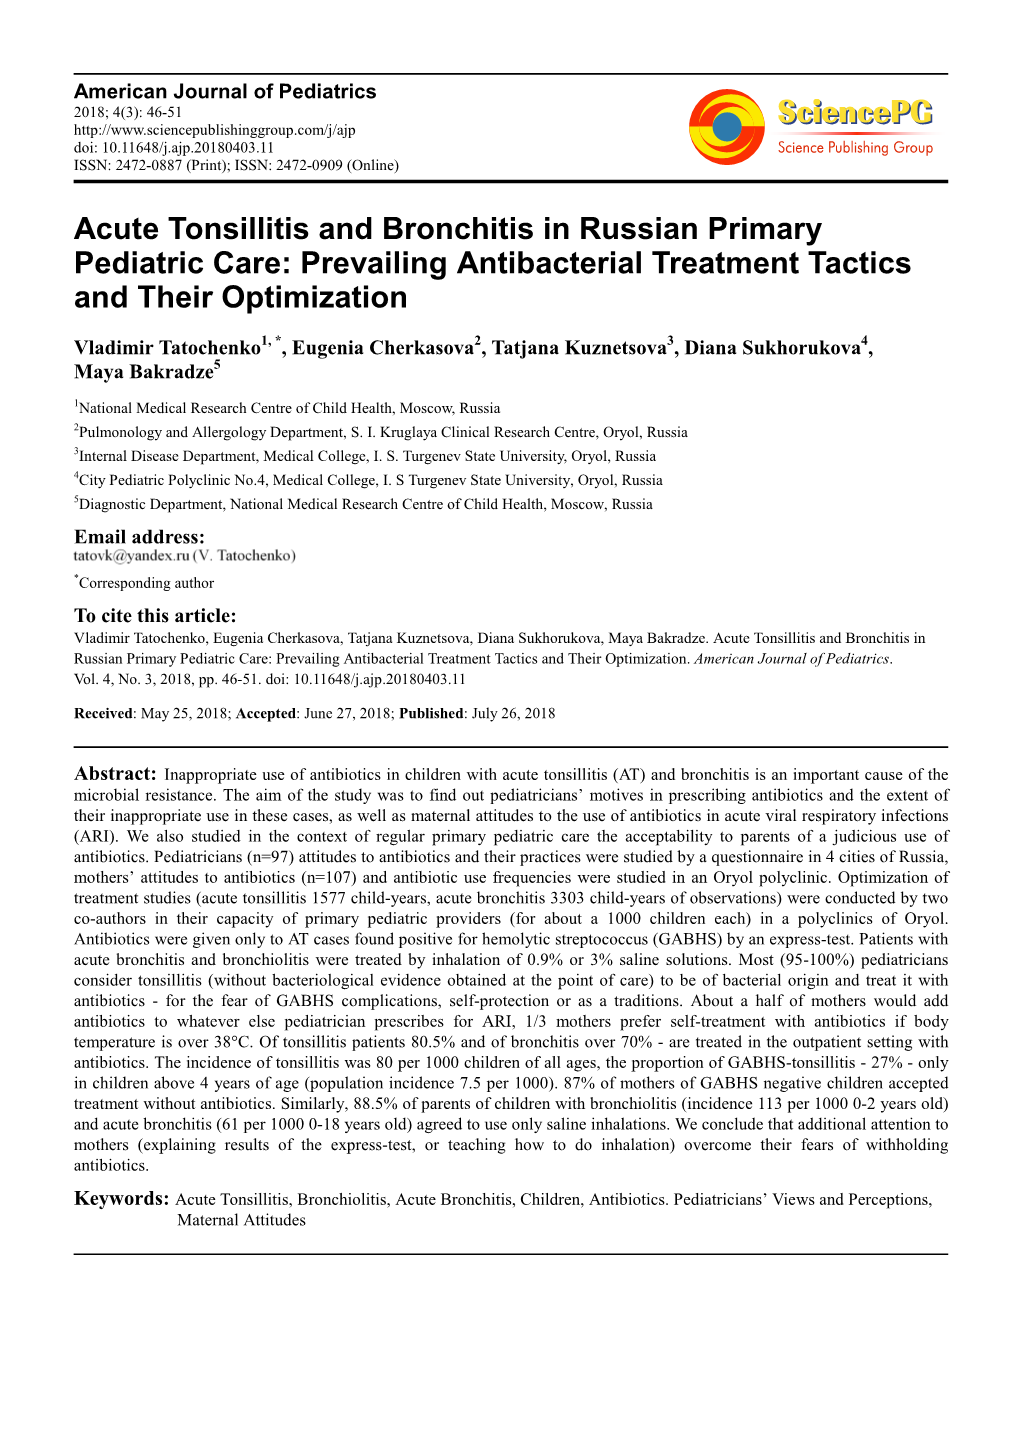 Acute Tonsillitis and Bronchitis in Russian Primary Pediatric Care: Prevailing Antibacterial Treatment Tactics and Their Optimization